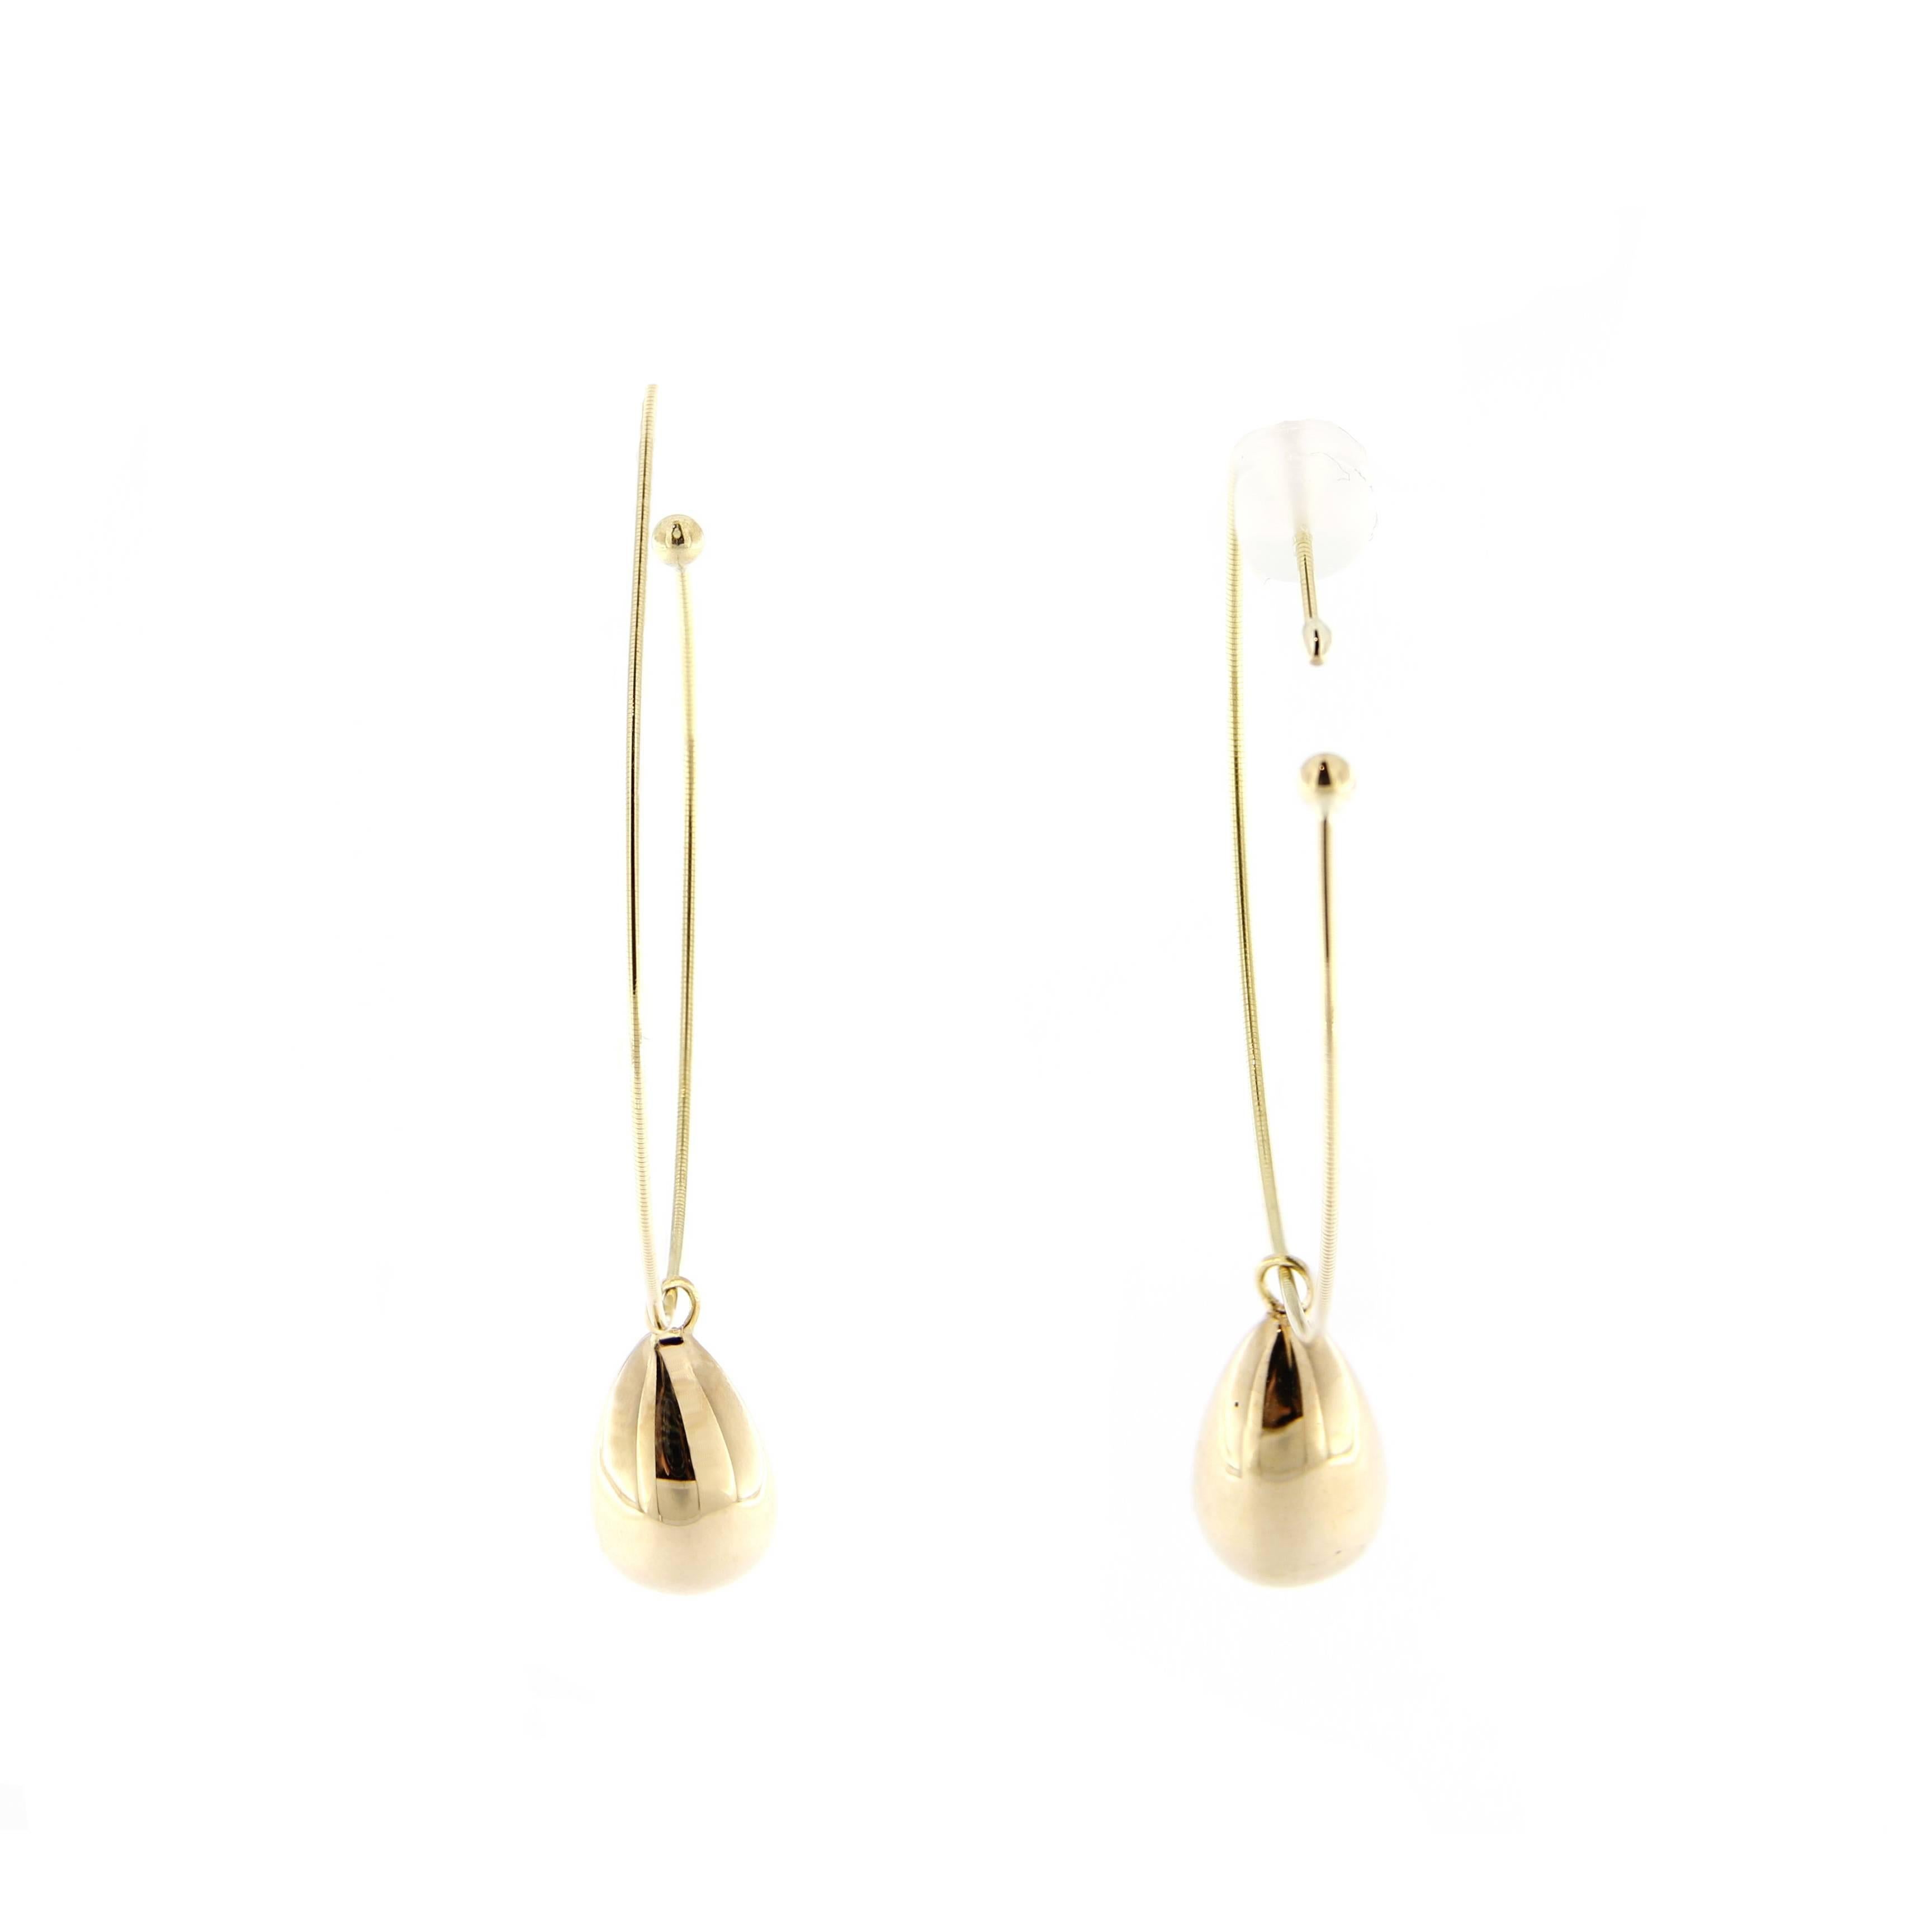 Jona design collection, hand crafted in Italy, 18 karat yellow gold flexible hoop earrings (diameter: 1.36 in.) With a sliding gold drop pendant.
All Jona jewelry is new and has never been previously owned or worn. Each item will arrive at your door